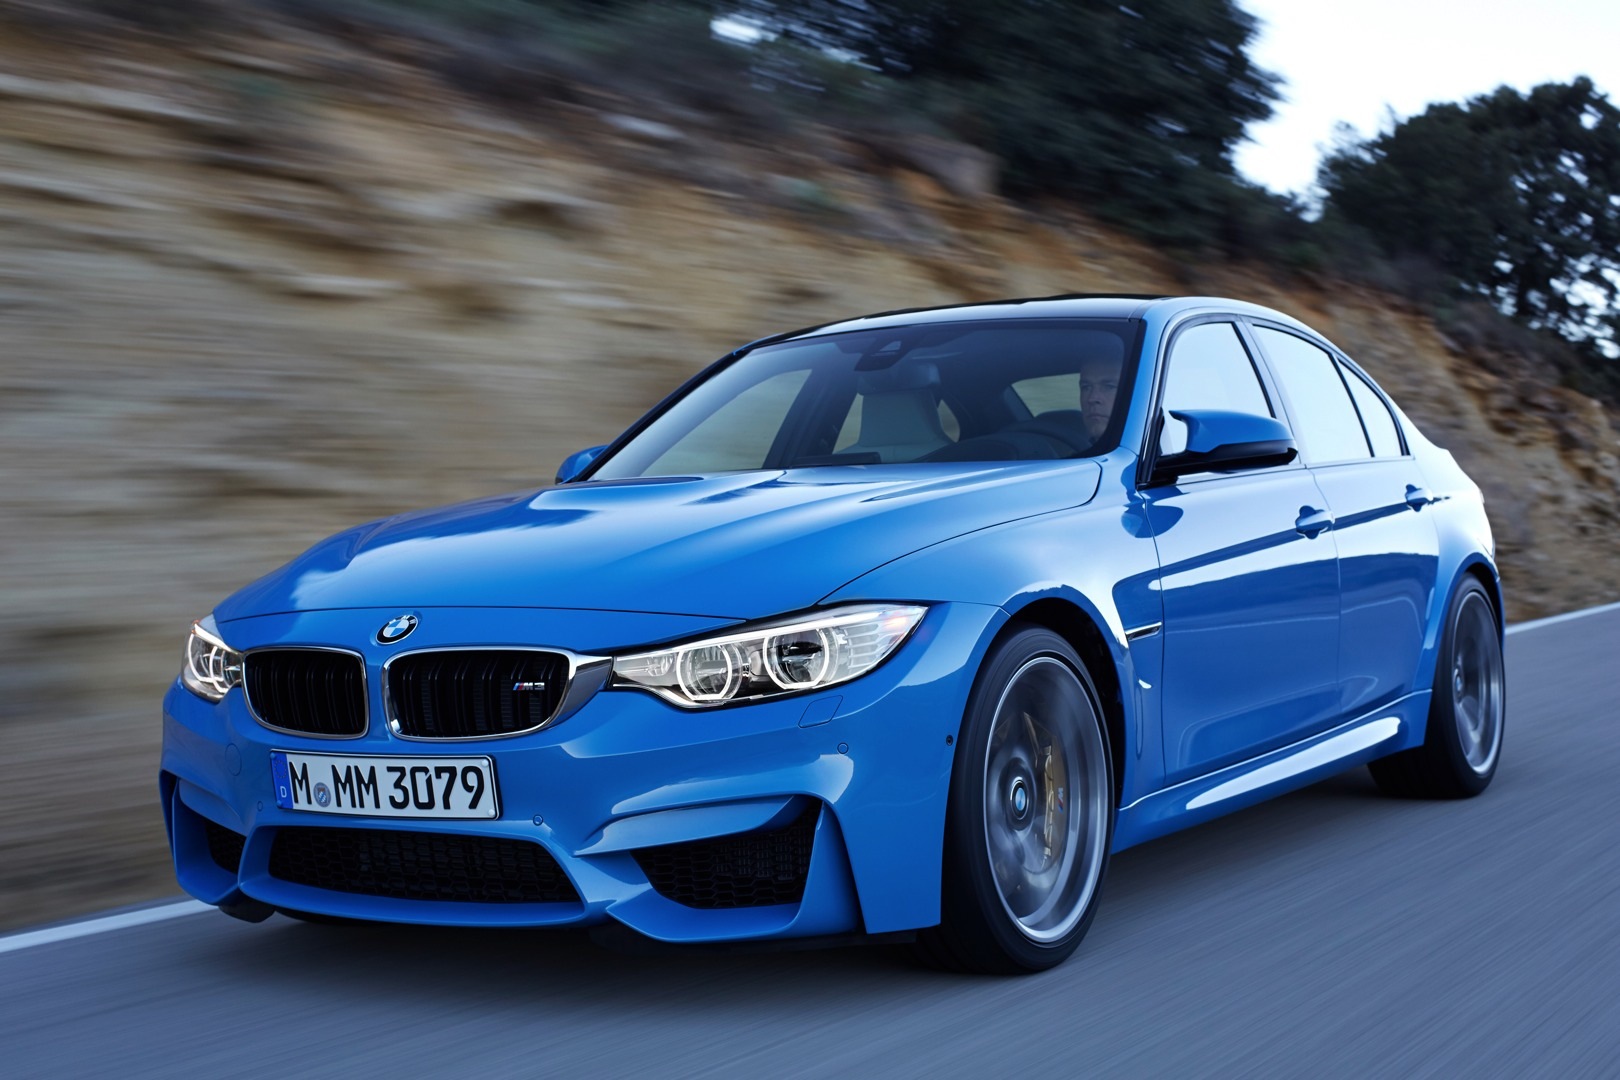 bmw-m3-sedan-and-m4-coupe-officially-unveiled-photo-gallery_5.jpg